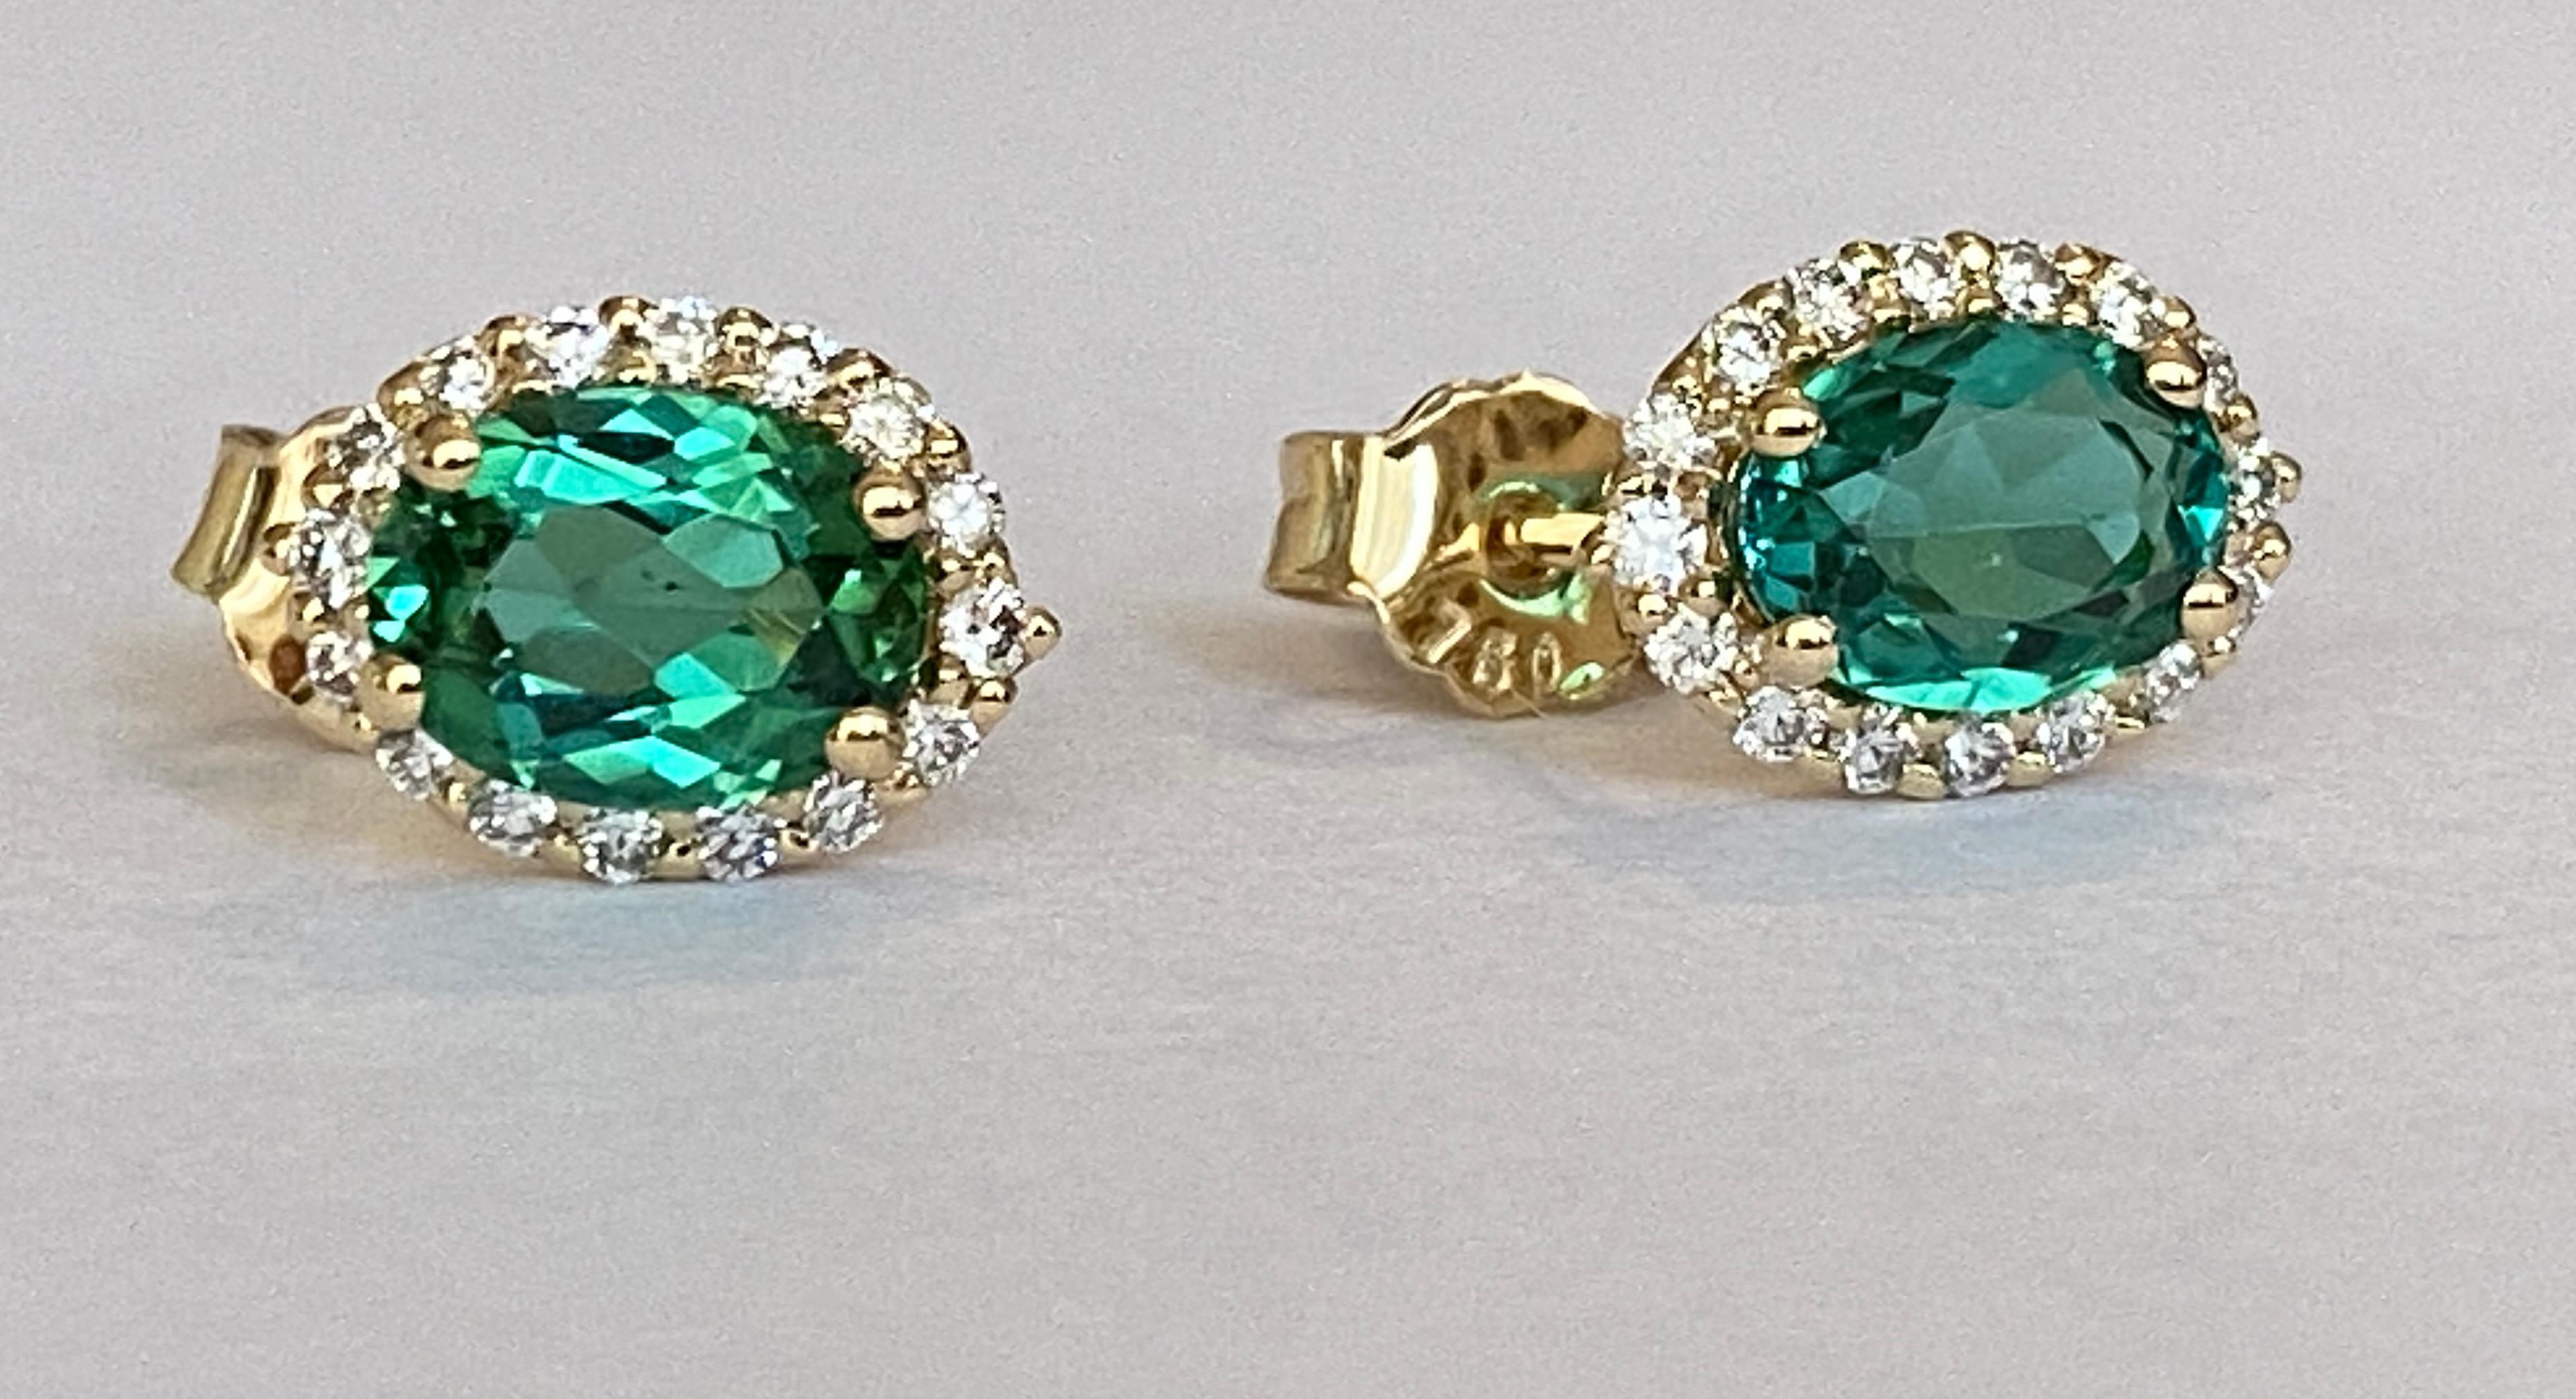 Contemporary 18 kt yellow gold Diamond earrings studs with Green Tourmaline For Sale